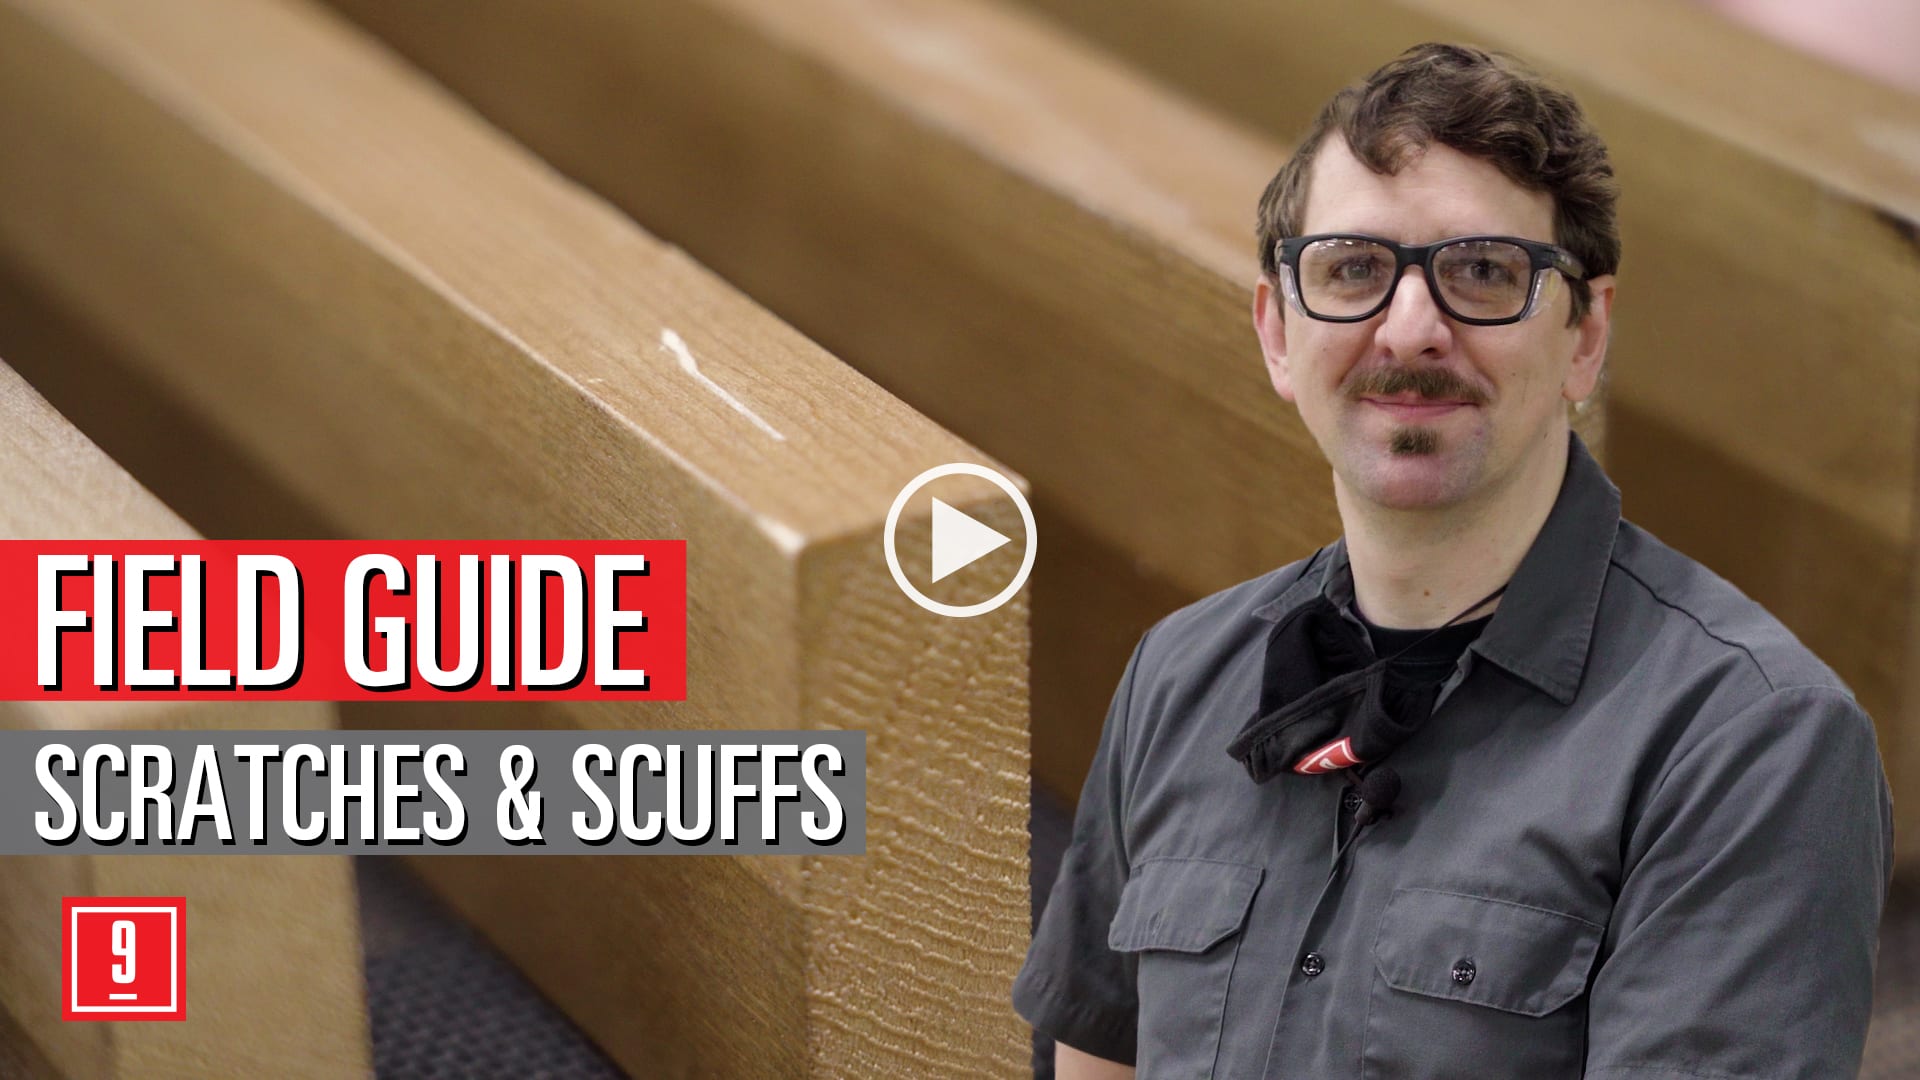 9Wood Field guide - repairing scratches and scuffs for wood ceilings